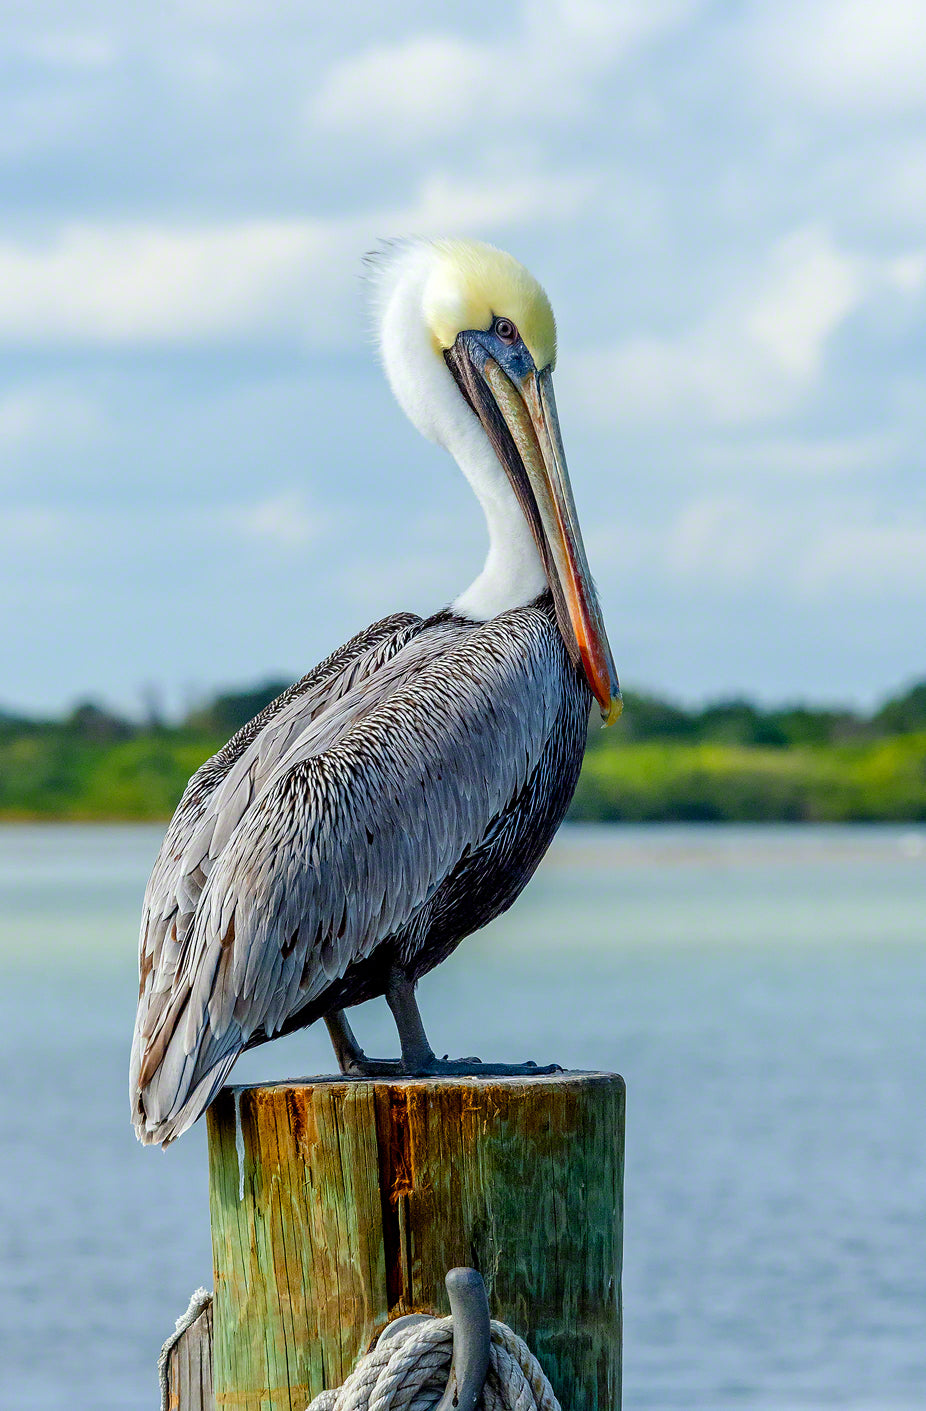 A photo of a brown pelican standing on a dock piling